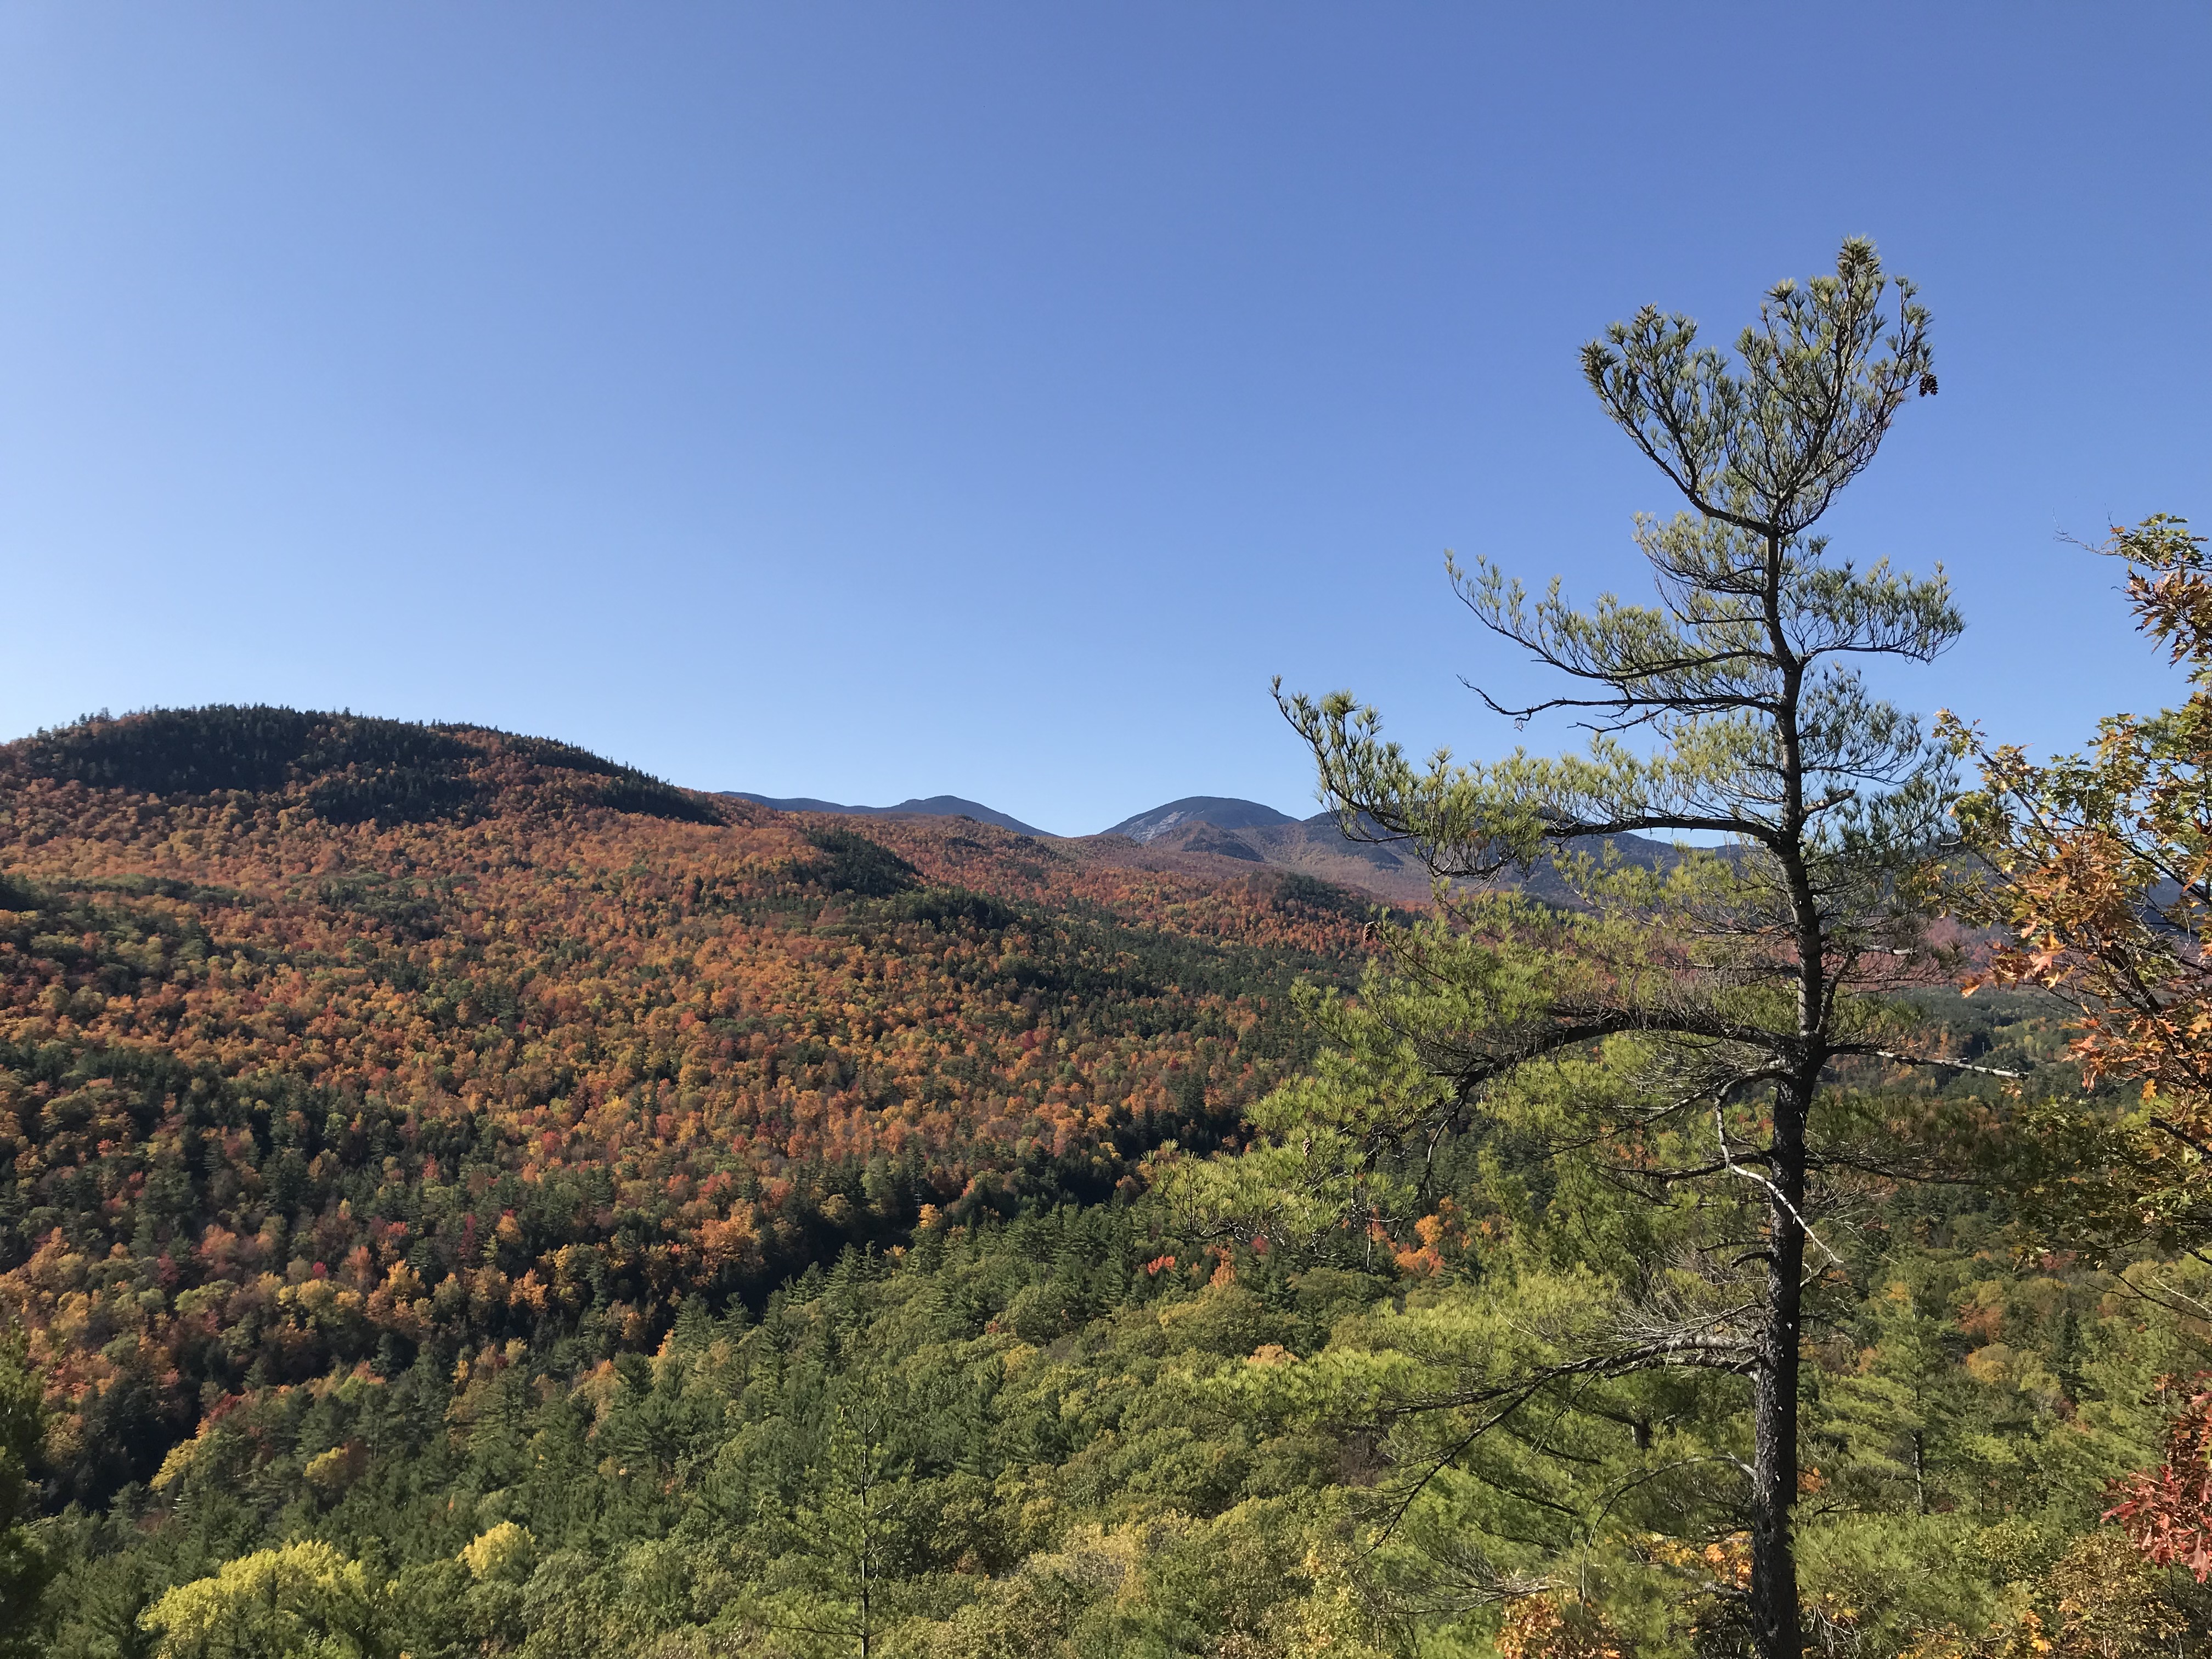 9 Ways to Give Back to the ADKS